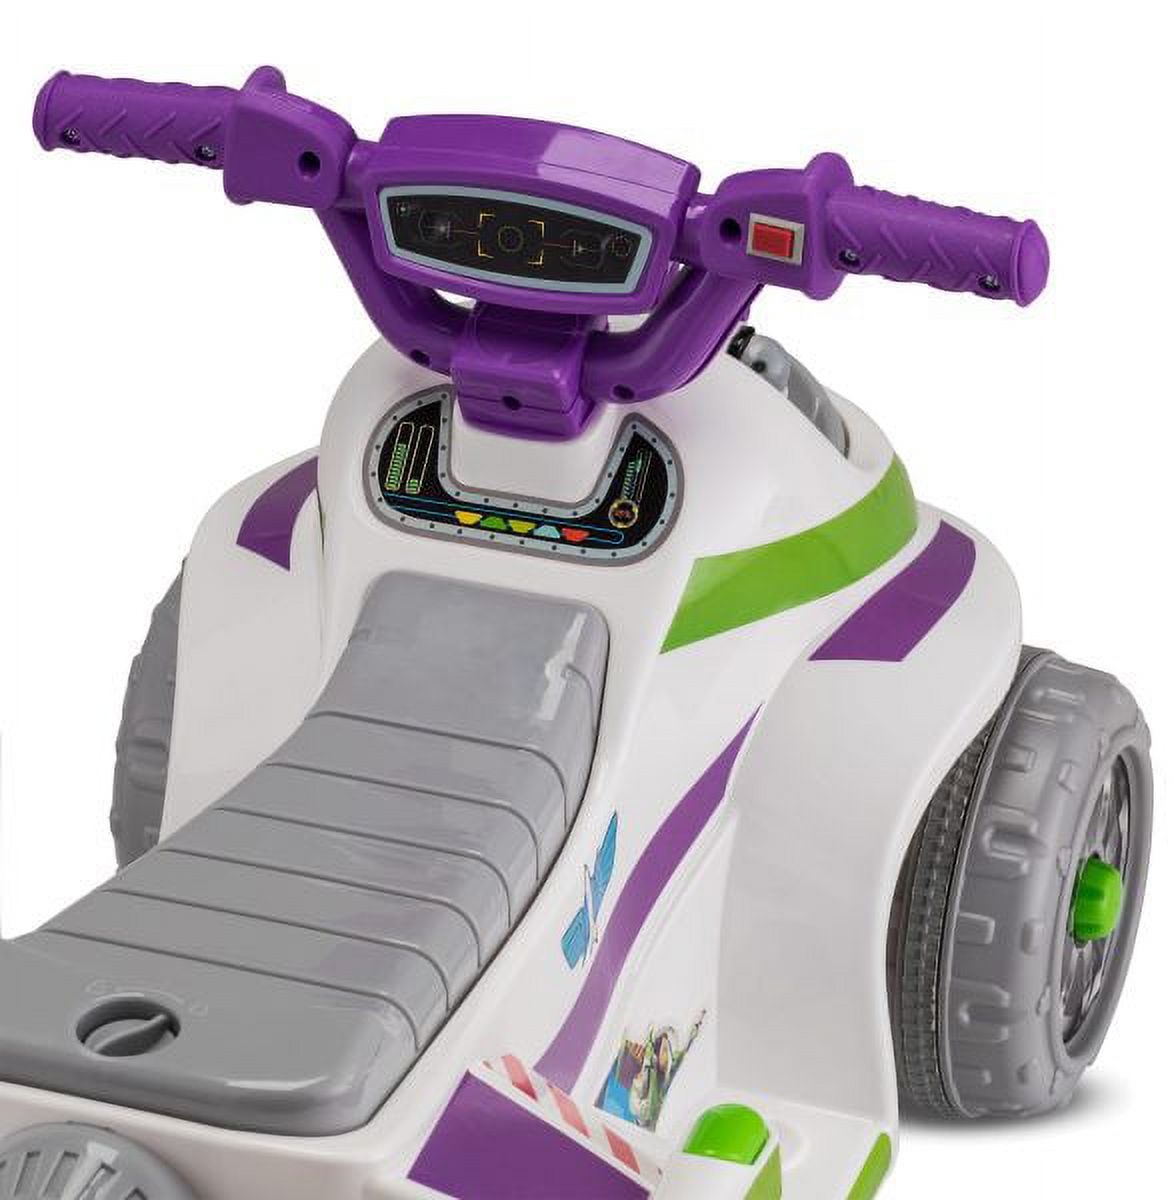 Pacific Cycle 6v Toy Story Buzz Lightyear Quad - image 5 of 7